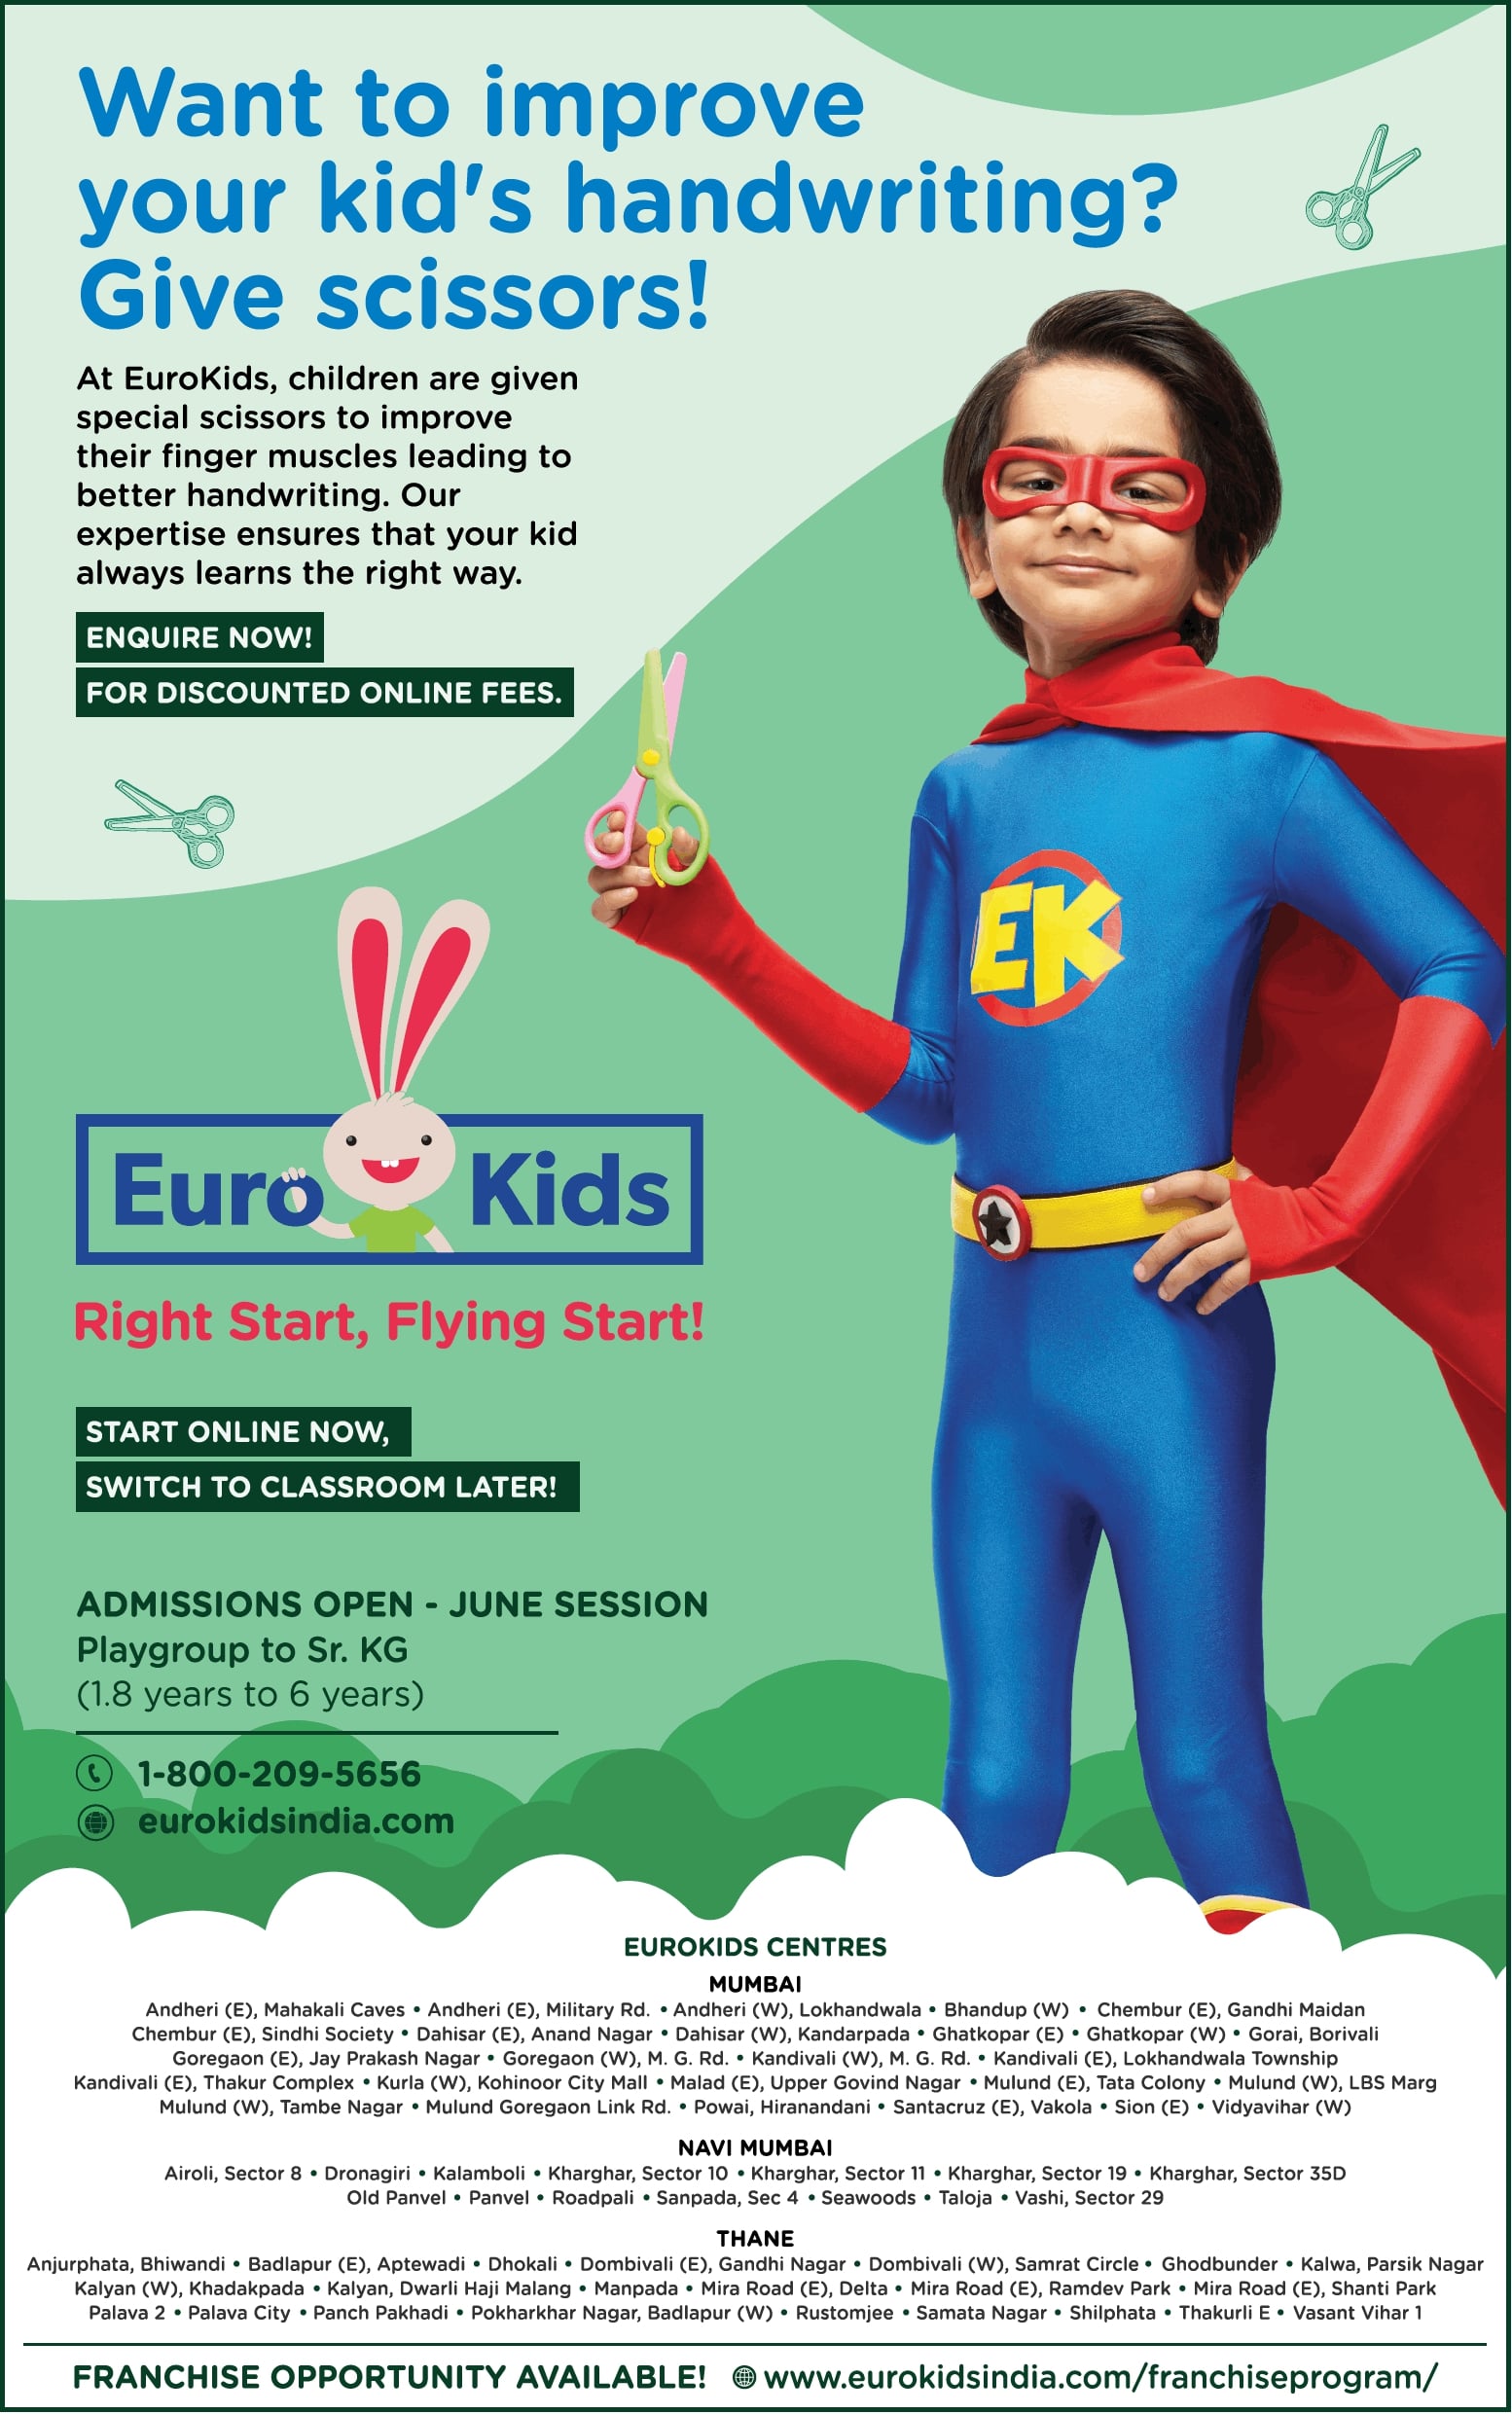 euro-kids-want-to-improve-your-kids-handwriting-give-scissors-ad-bombay-times-05-06-2021